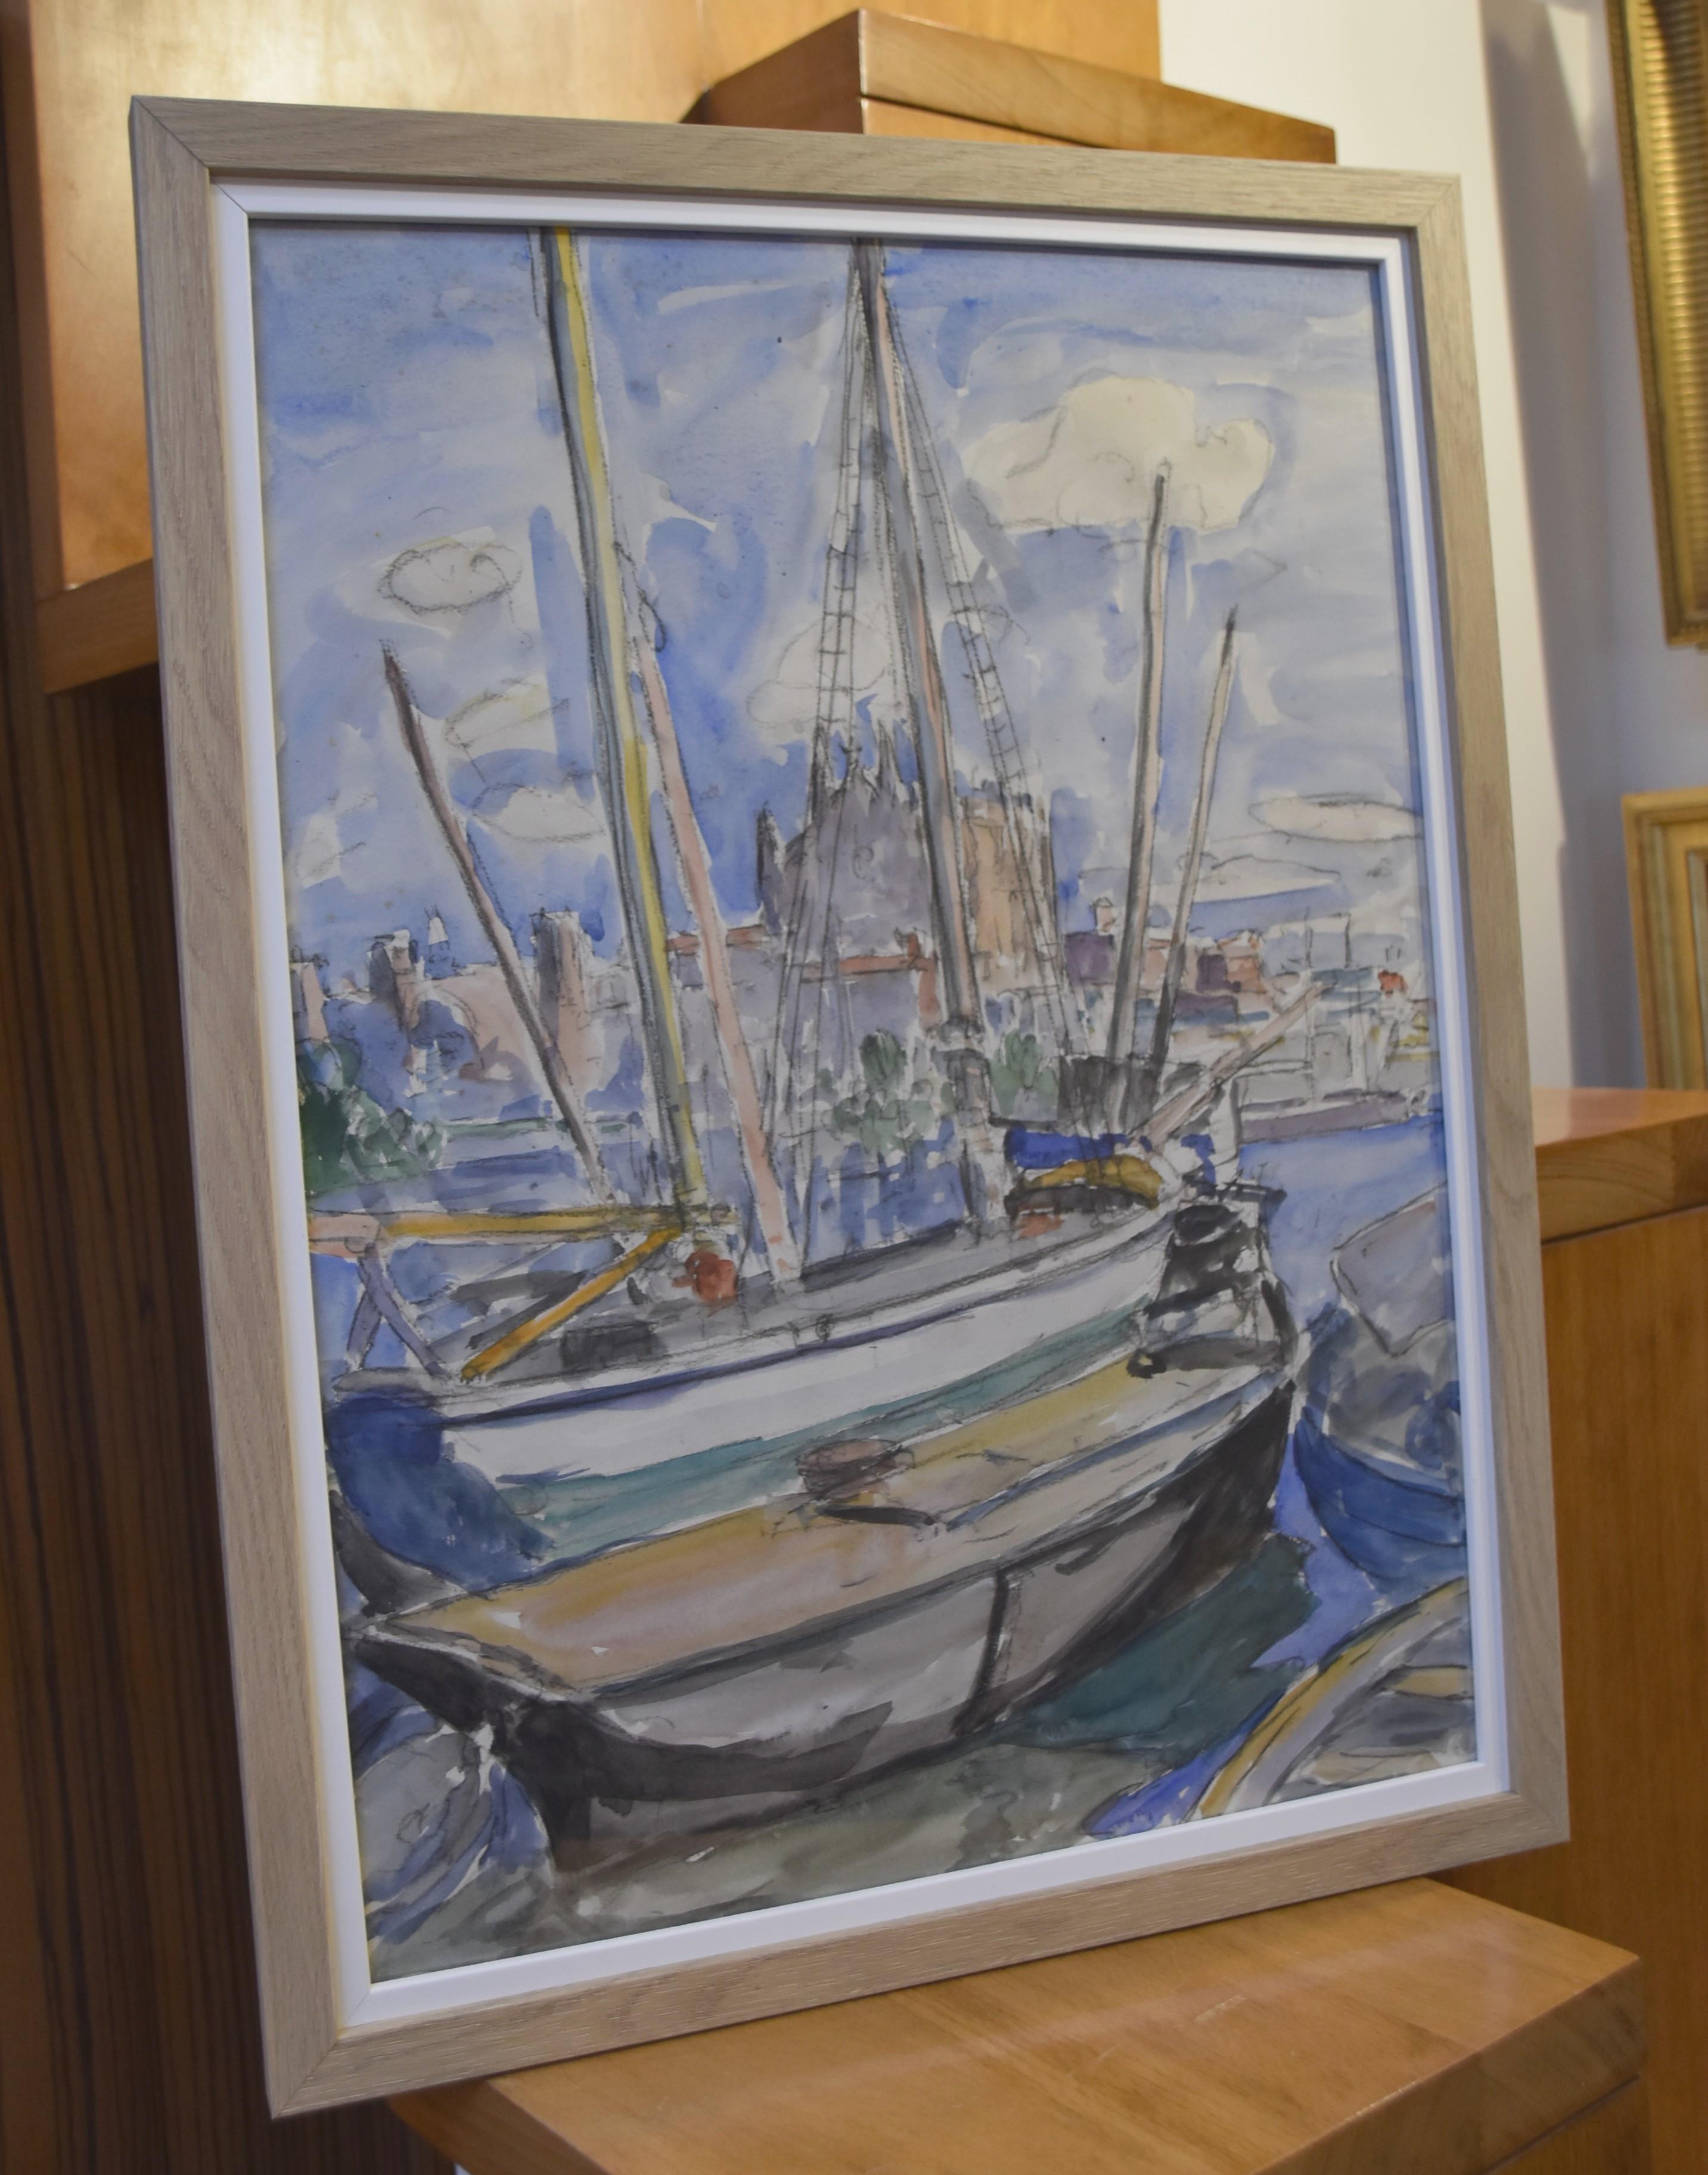 Modern School, Mid 20th century
Boats in Palma de Mallorca
Watercolor on paper
50 x 36.5 cm
Framed : 56.5 x 43 cm

The characteristic silhouette of the facade of the cathedral of Palma de Mallorca allows to identify at first glance, the port and to